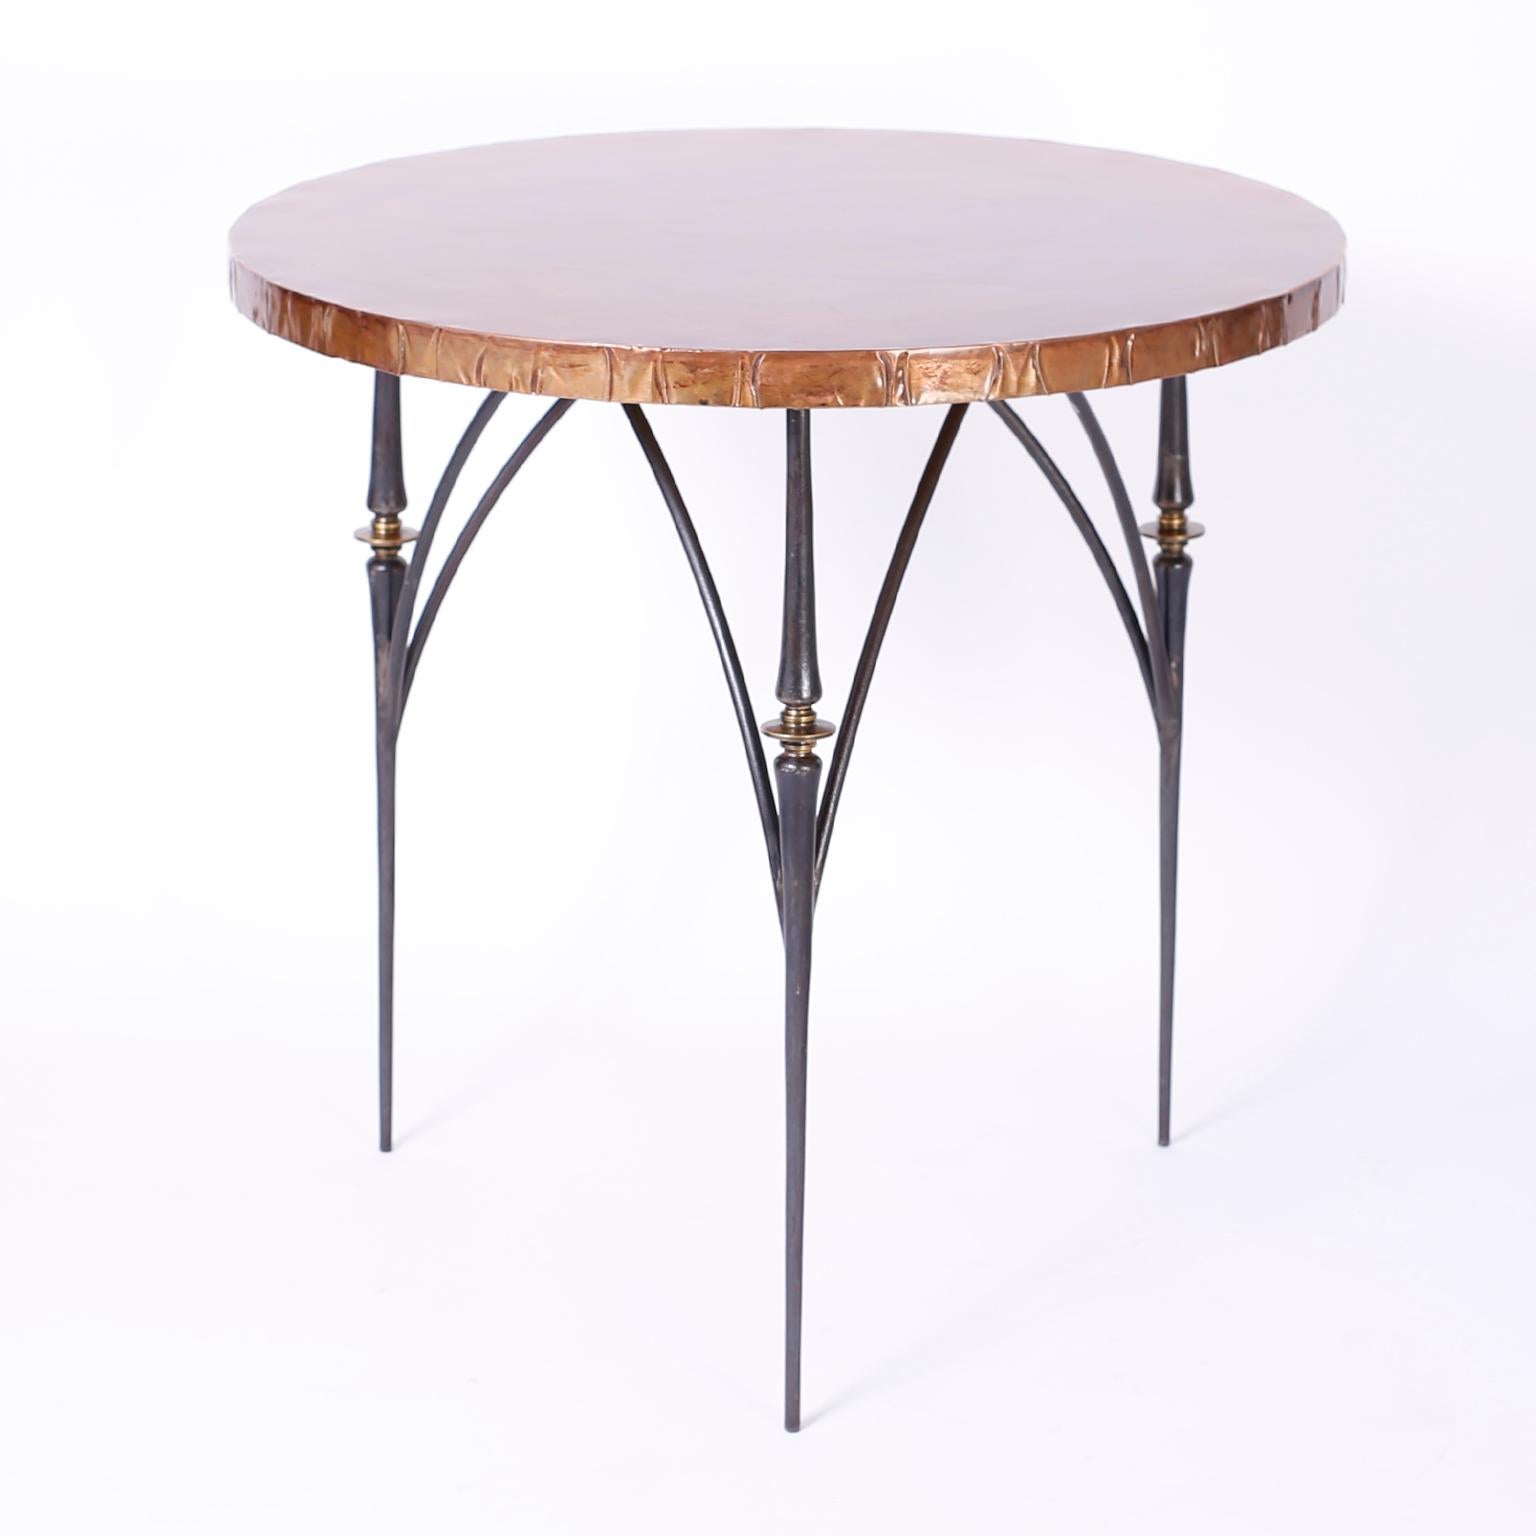 Pair of midcentury tables with hand hammered copper round tops having acquired a time worn patina over three elegant legs featuring turned brass ornaments and architecturally interesting arched supports.